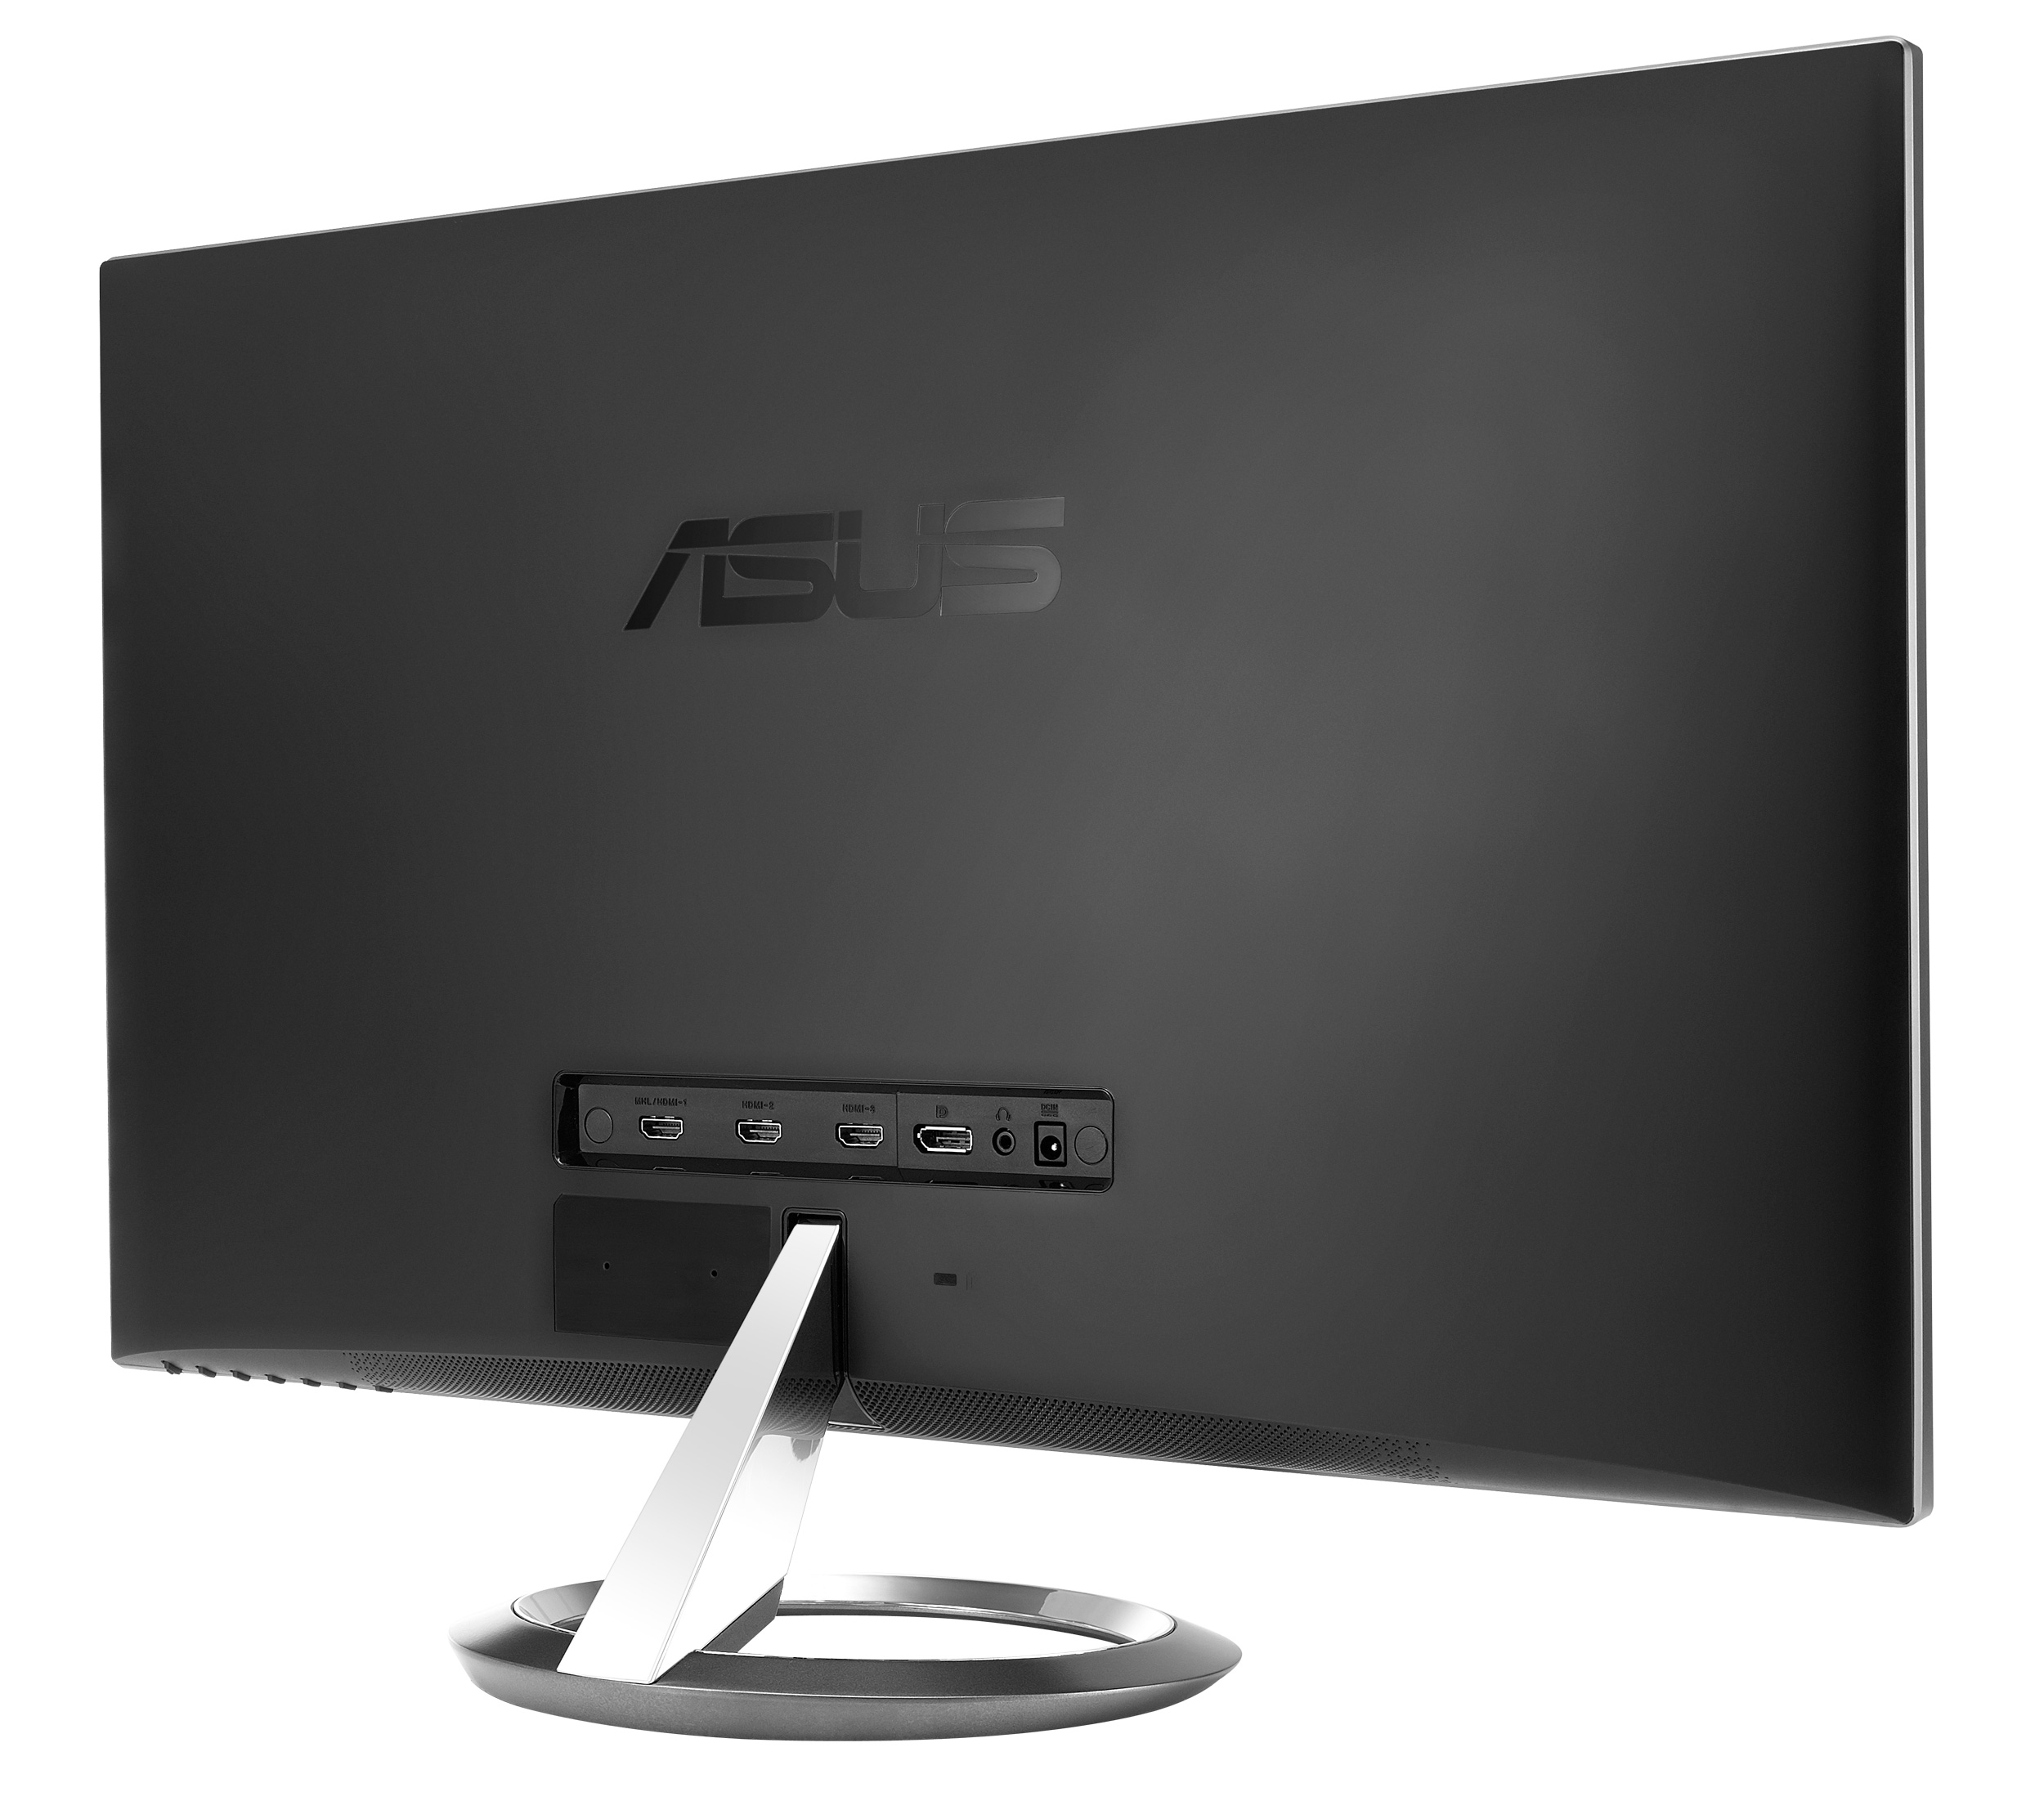 Media asset in full size related to 3dfxzone.it news item entitled as follows: ASUS annuncia il gaming monitor da 27-inch Designo MX27AQ | Image Name: news22236_ASUS-Designo-MX27AQ_2.png